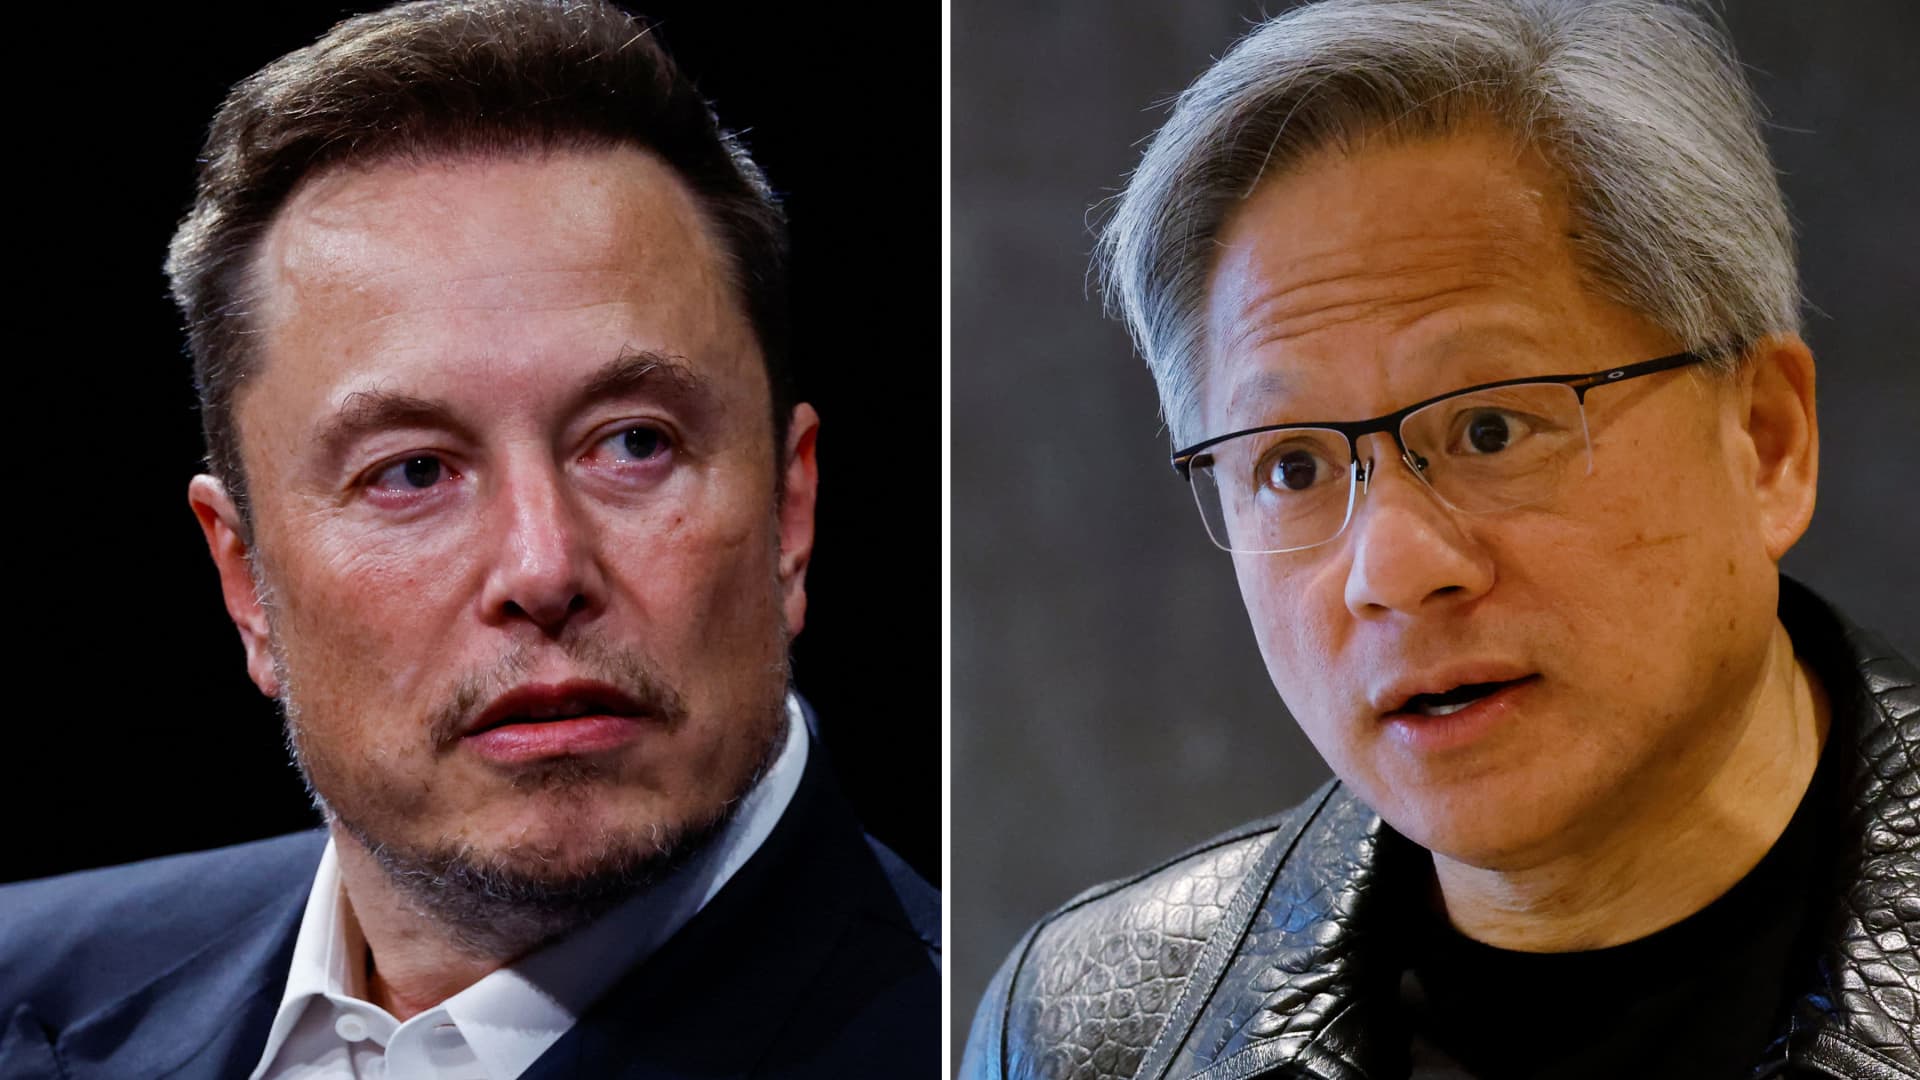 Elon Musk buying Nvidia hardware even as Tesla aims to build AI rival [Video]